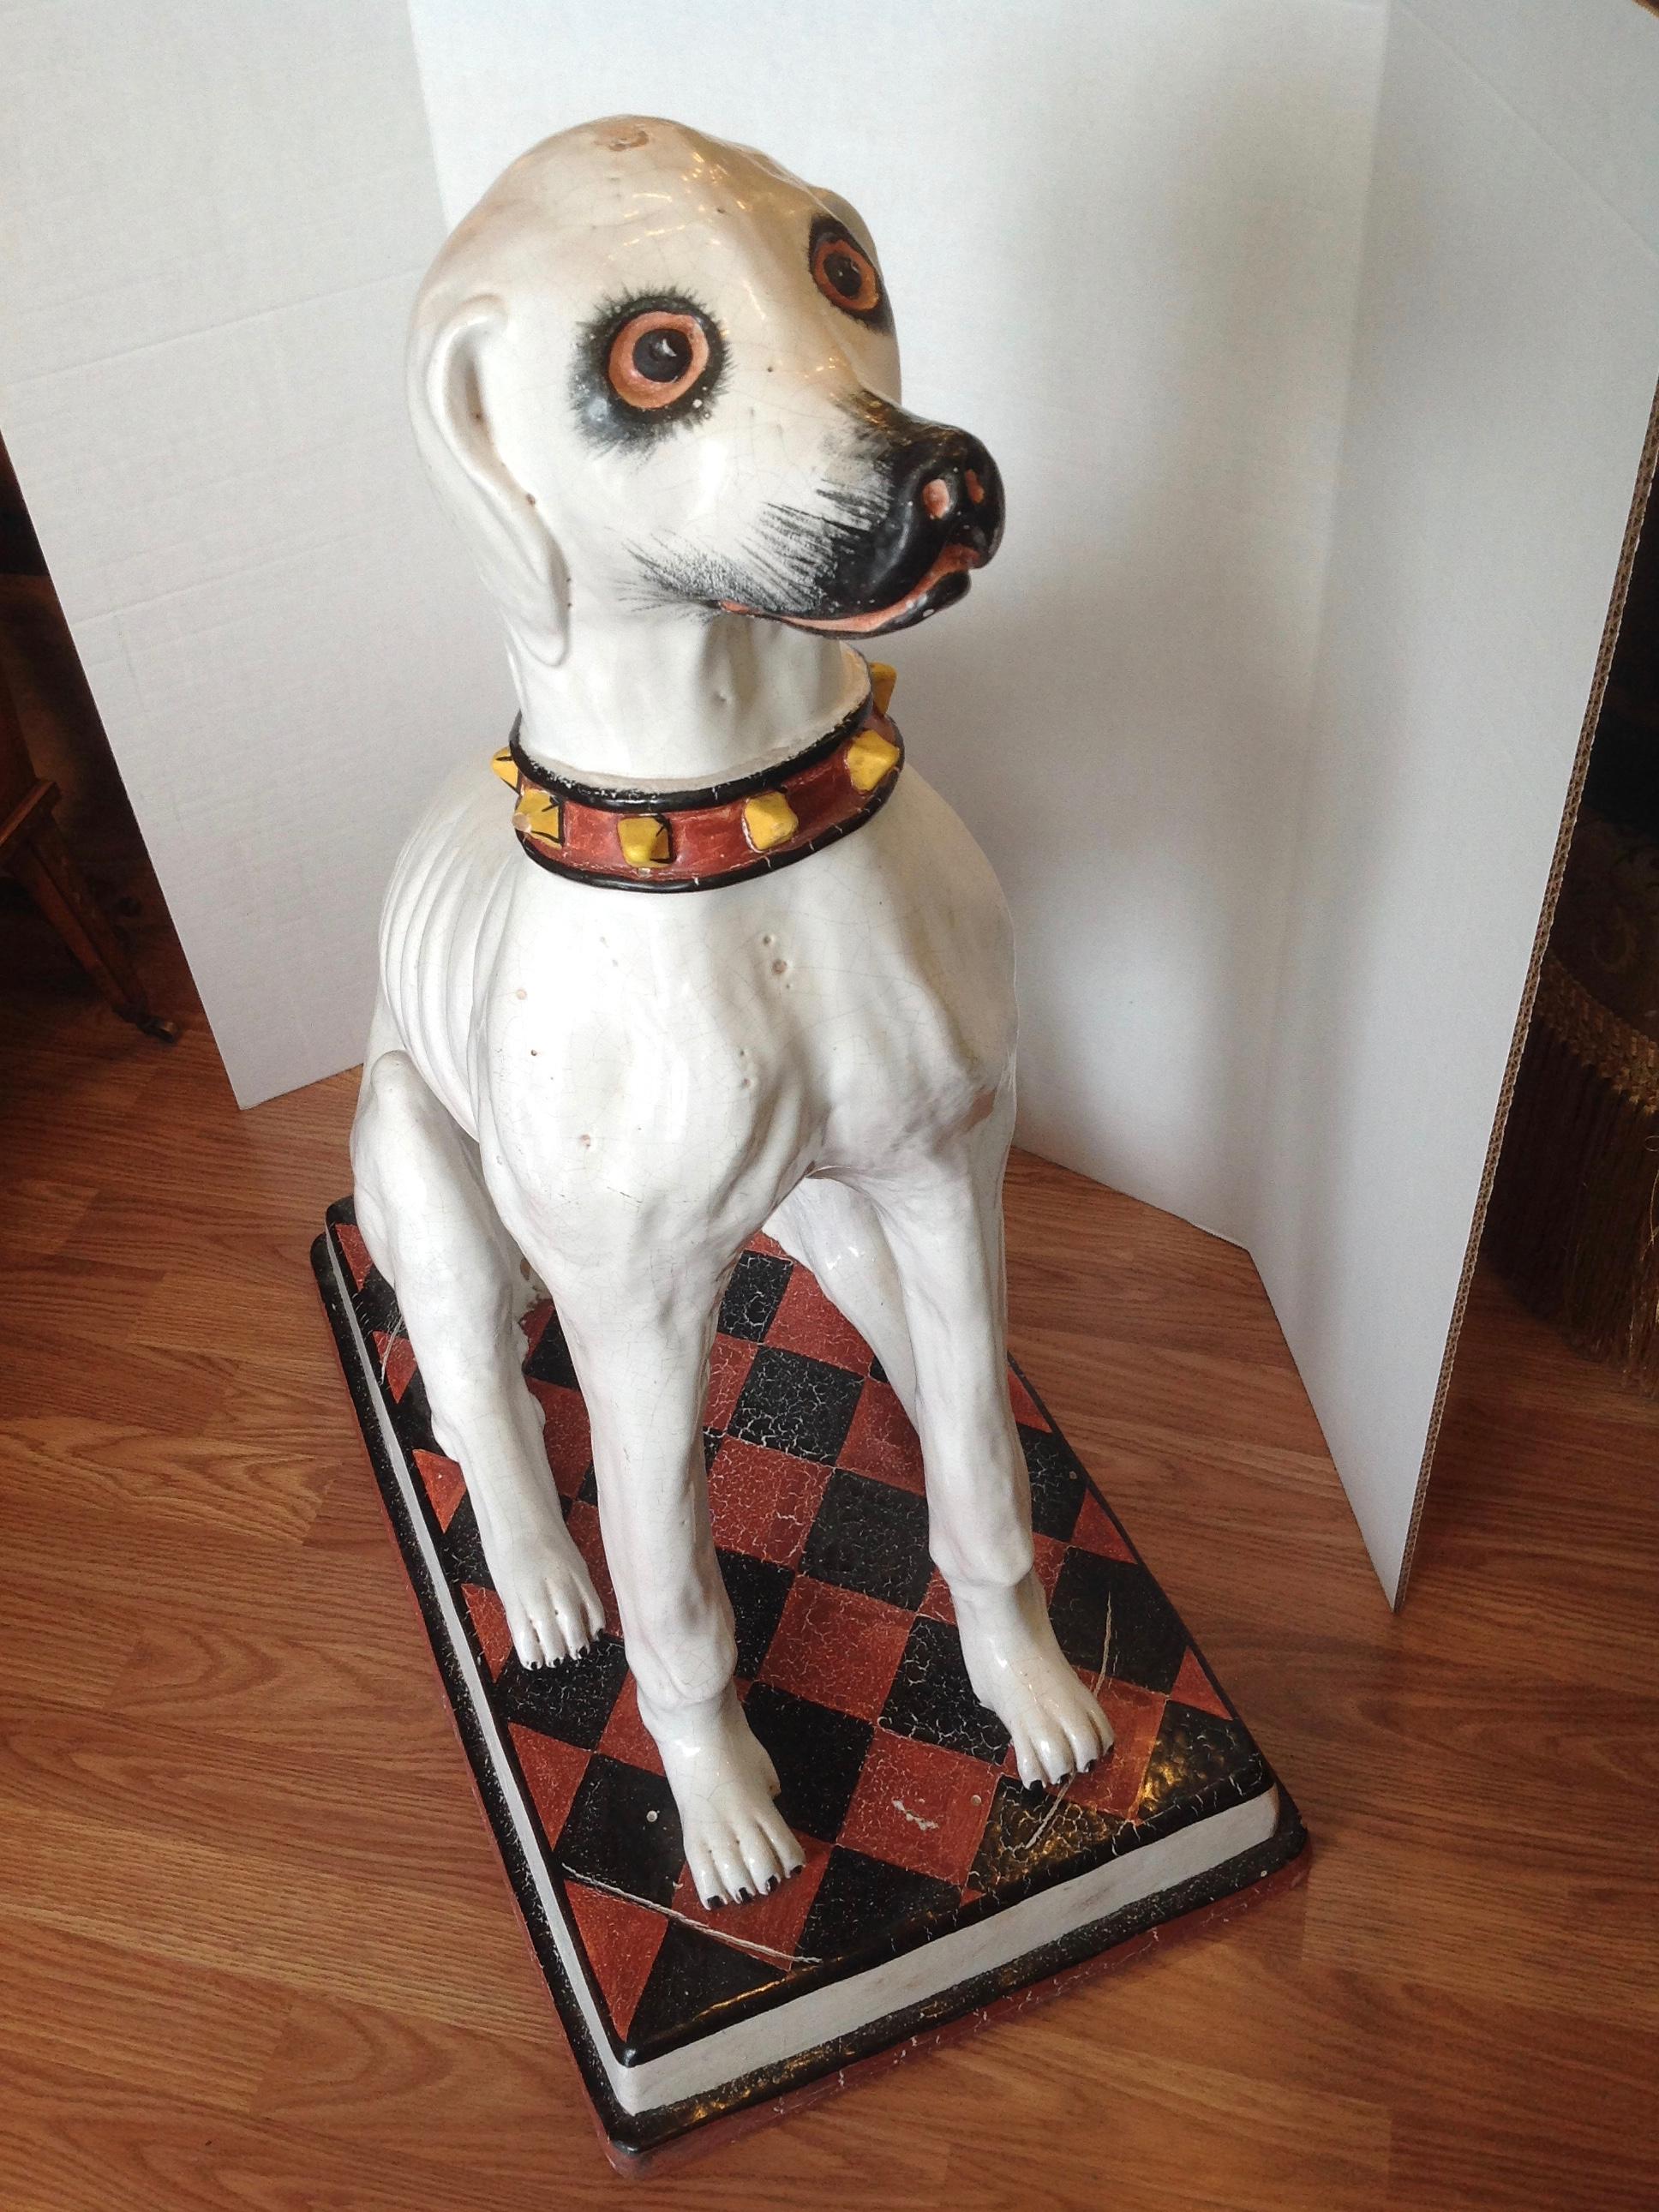 Glazed Enormous Whimsical Midcentury Statue of a Dog